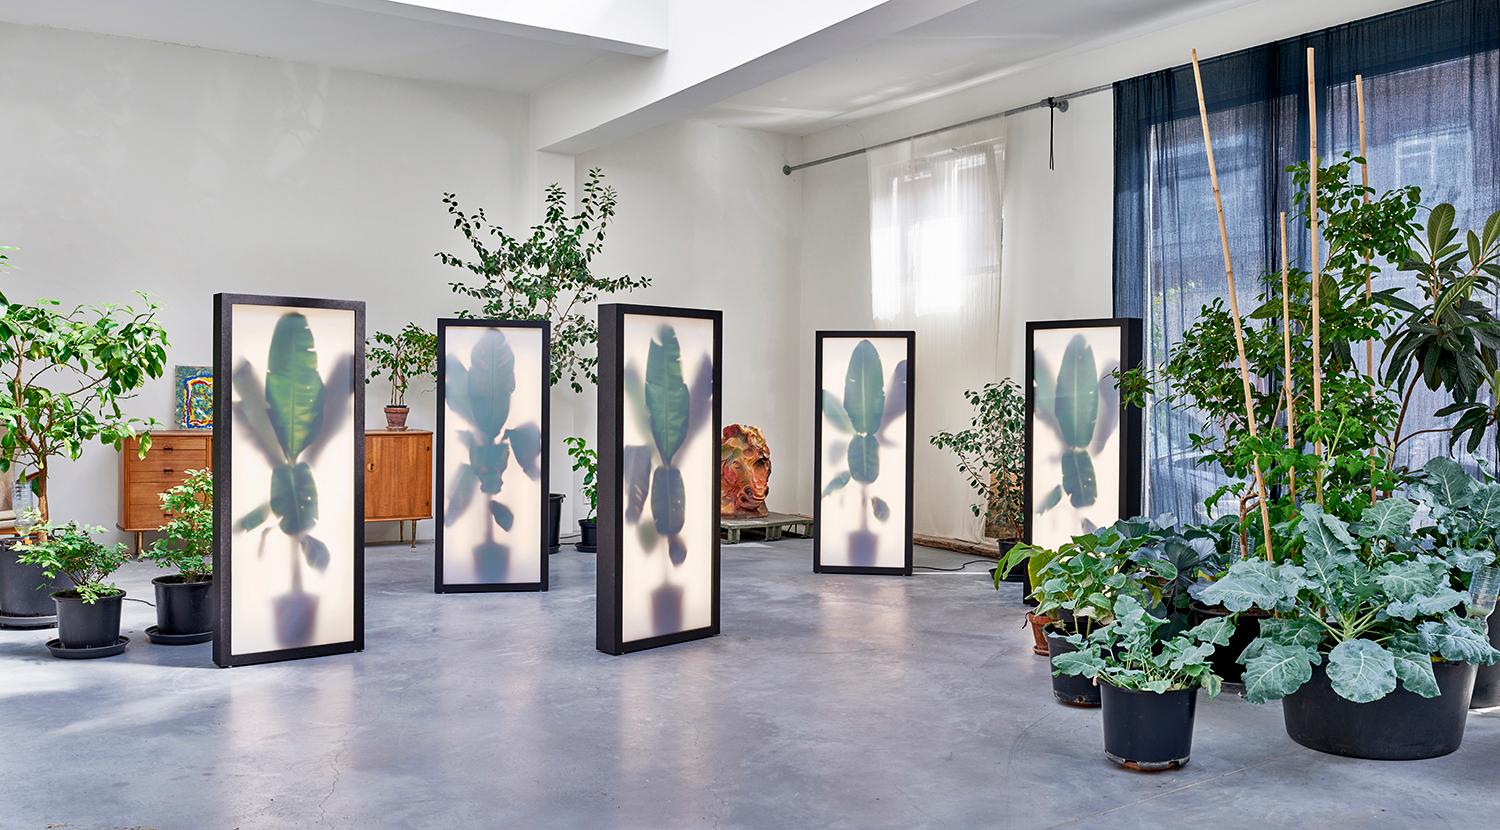 Dutch REM Atelier, Growing Plants Indoors, Light Box with Photographic Collage, 2018 For Sale